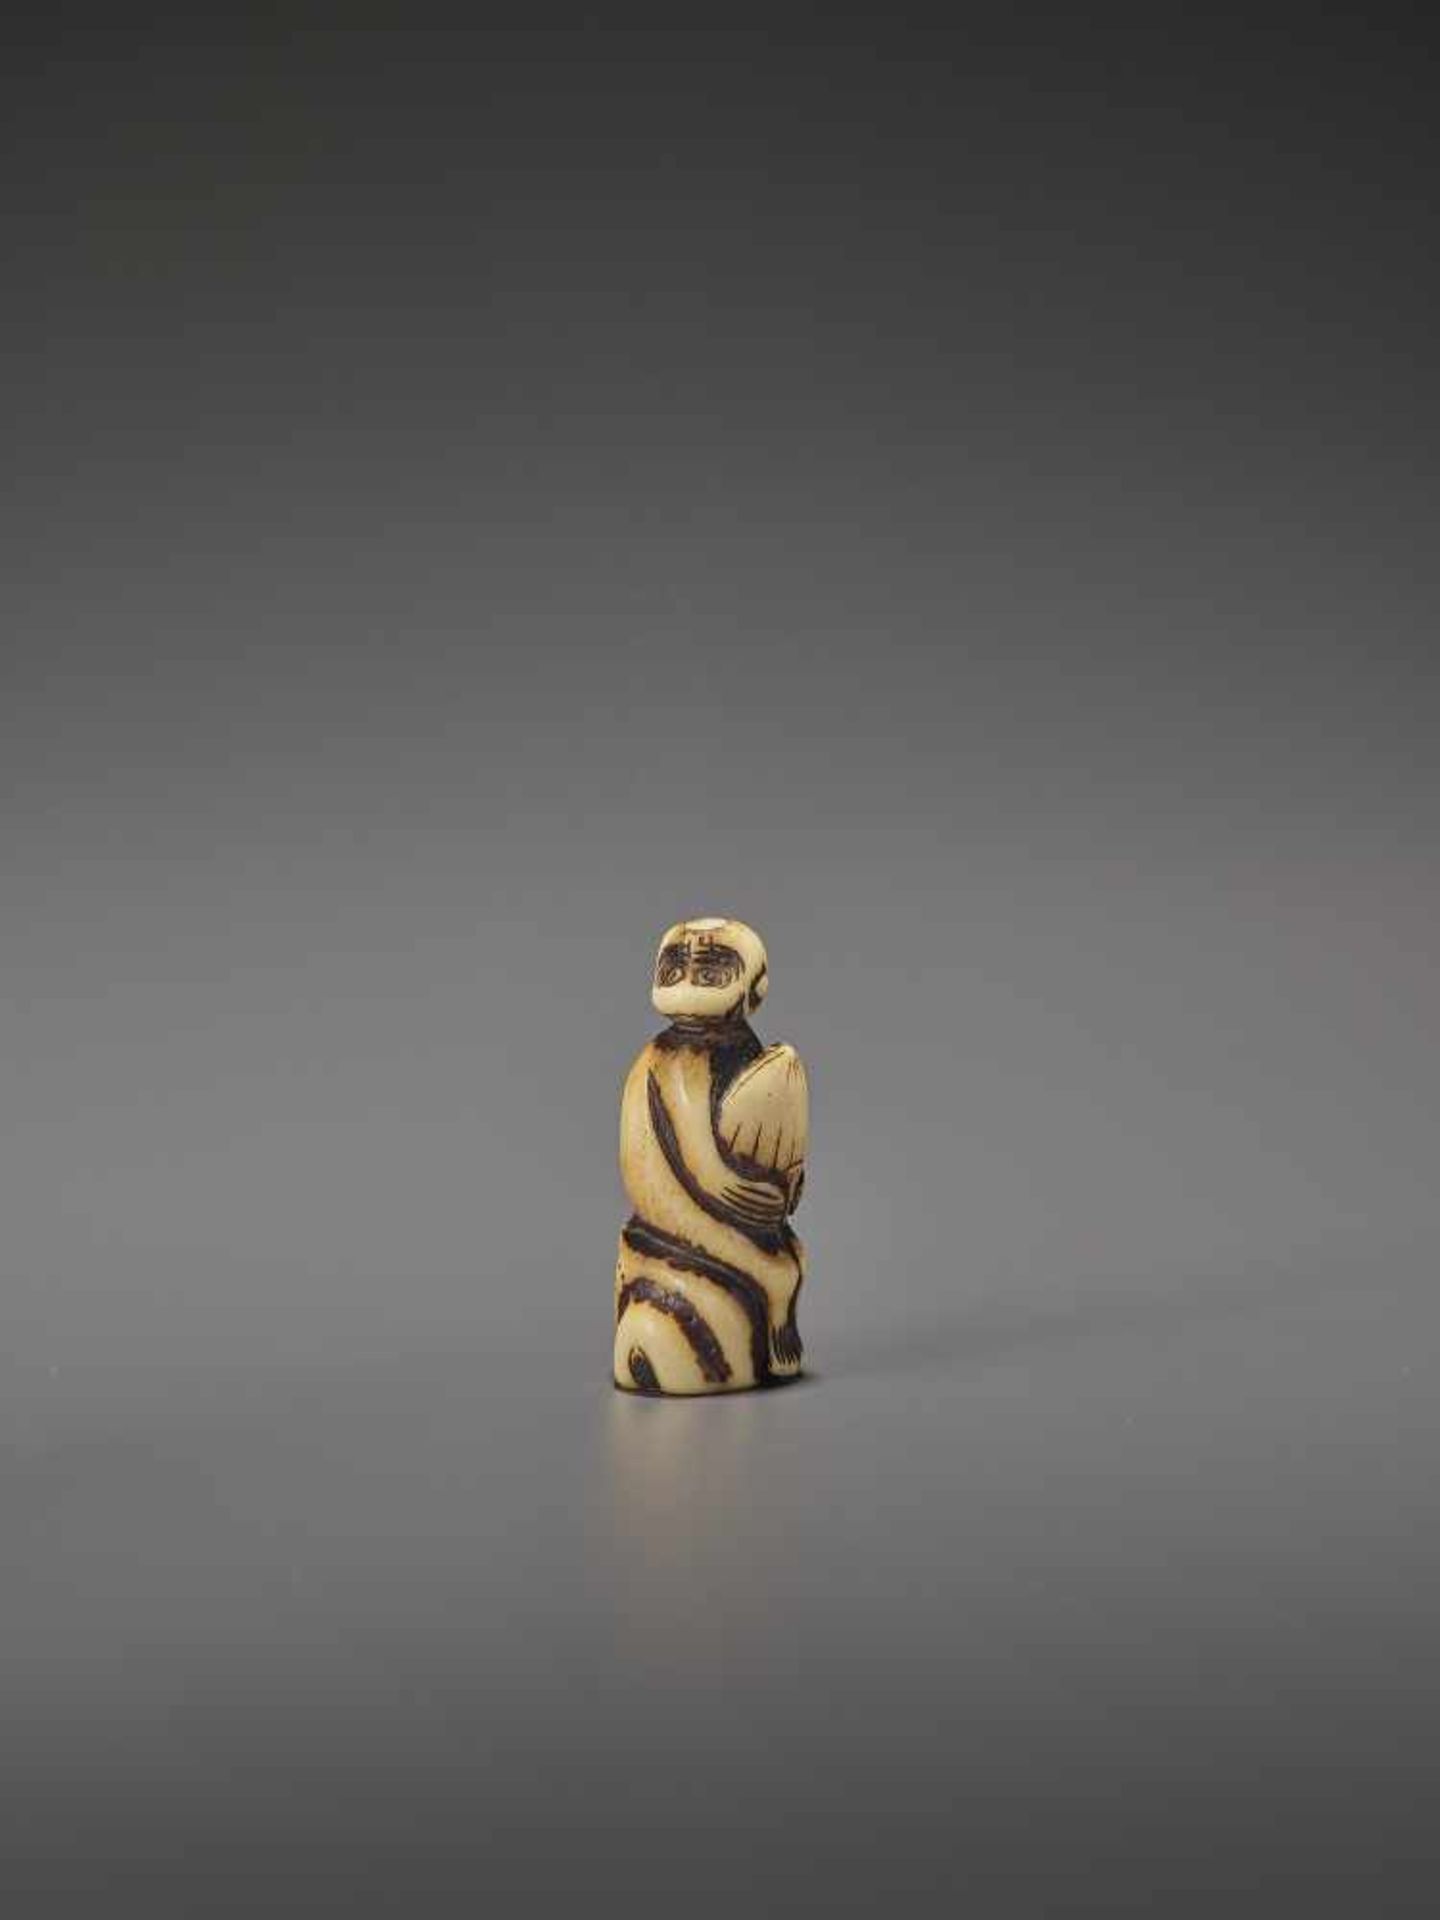 A STAG ANTLER NETSUKE OF A MONKEY WITH CHESTNUT UnsignedJapan, 18th century, Edo period (1615-1868)